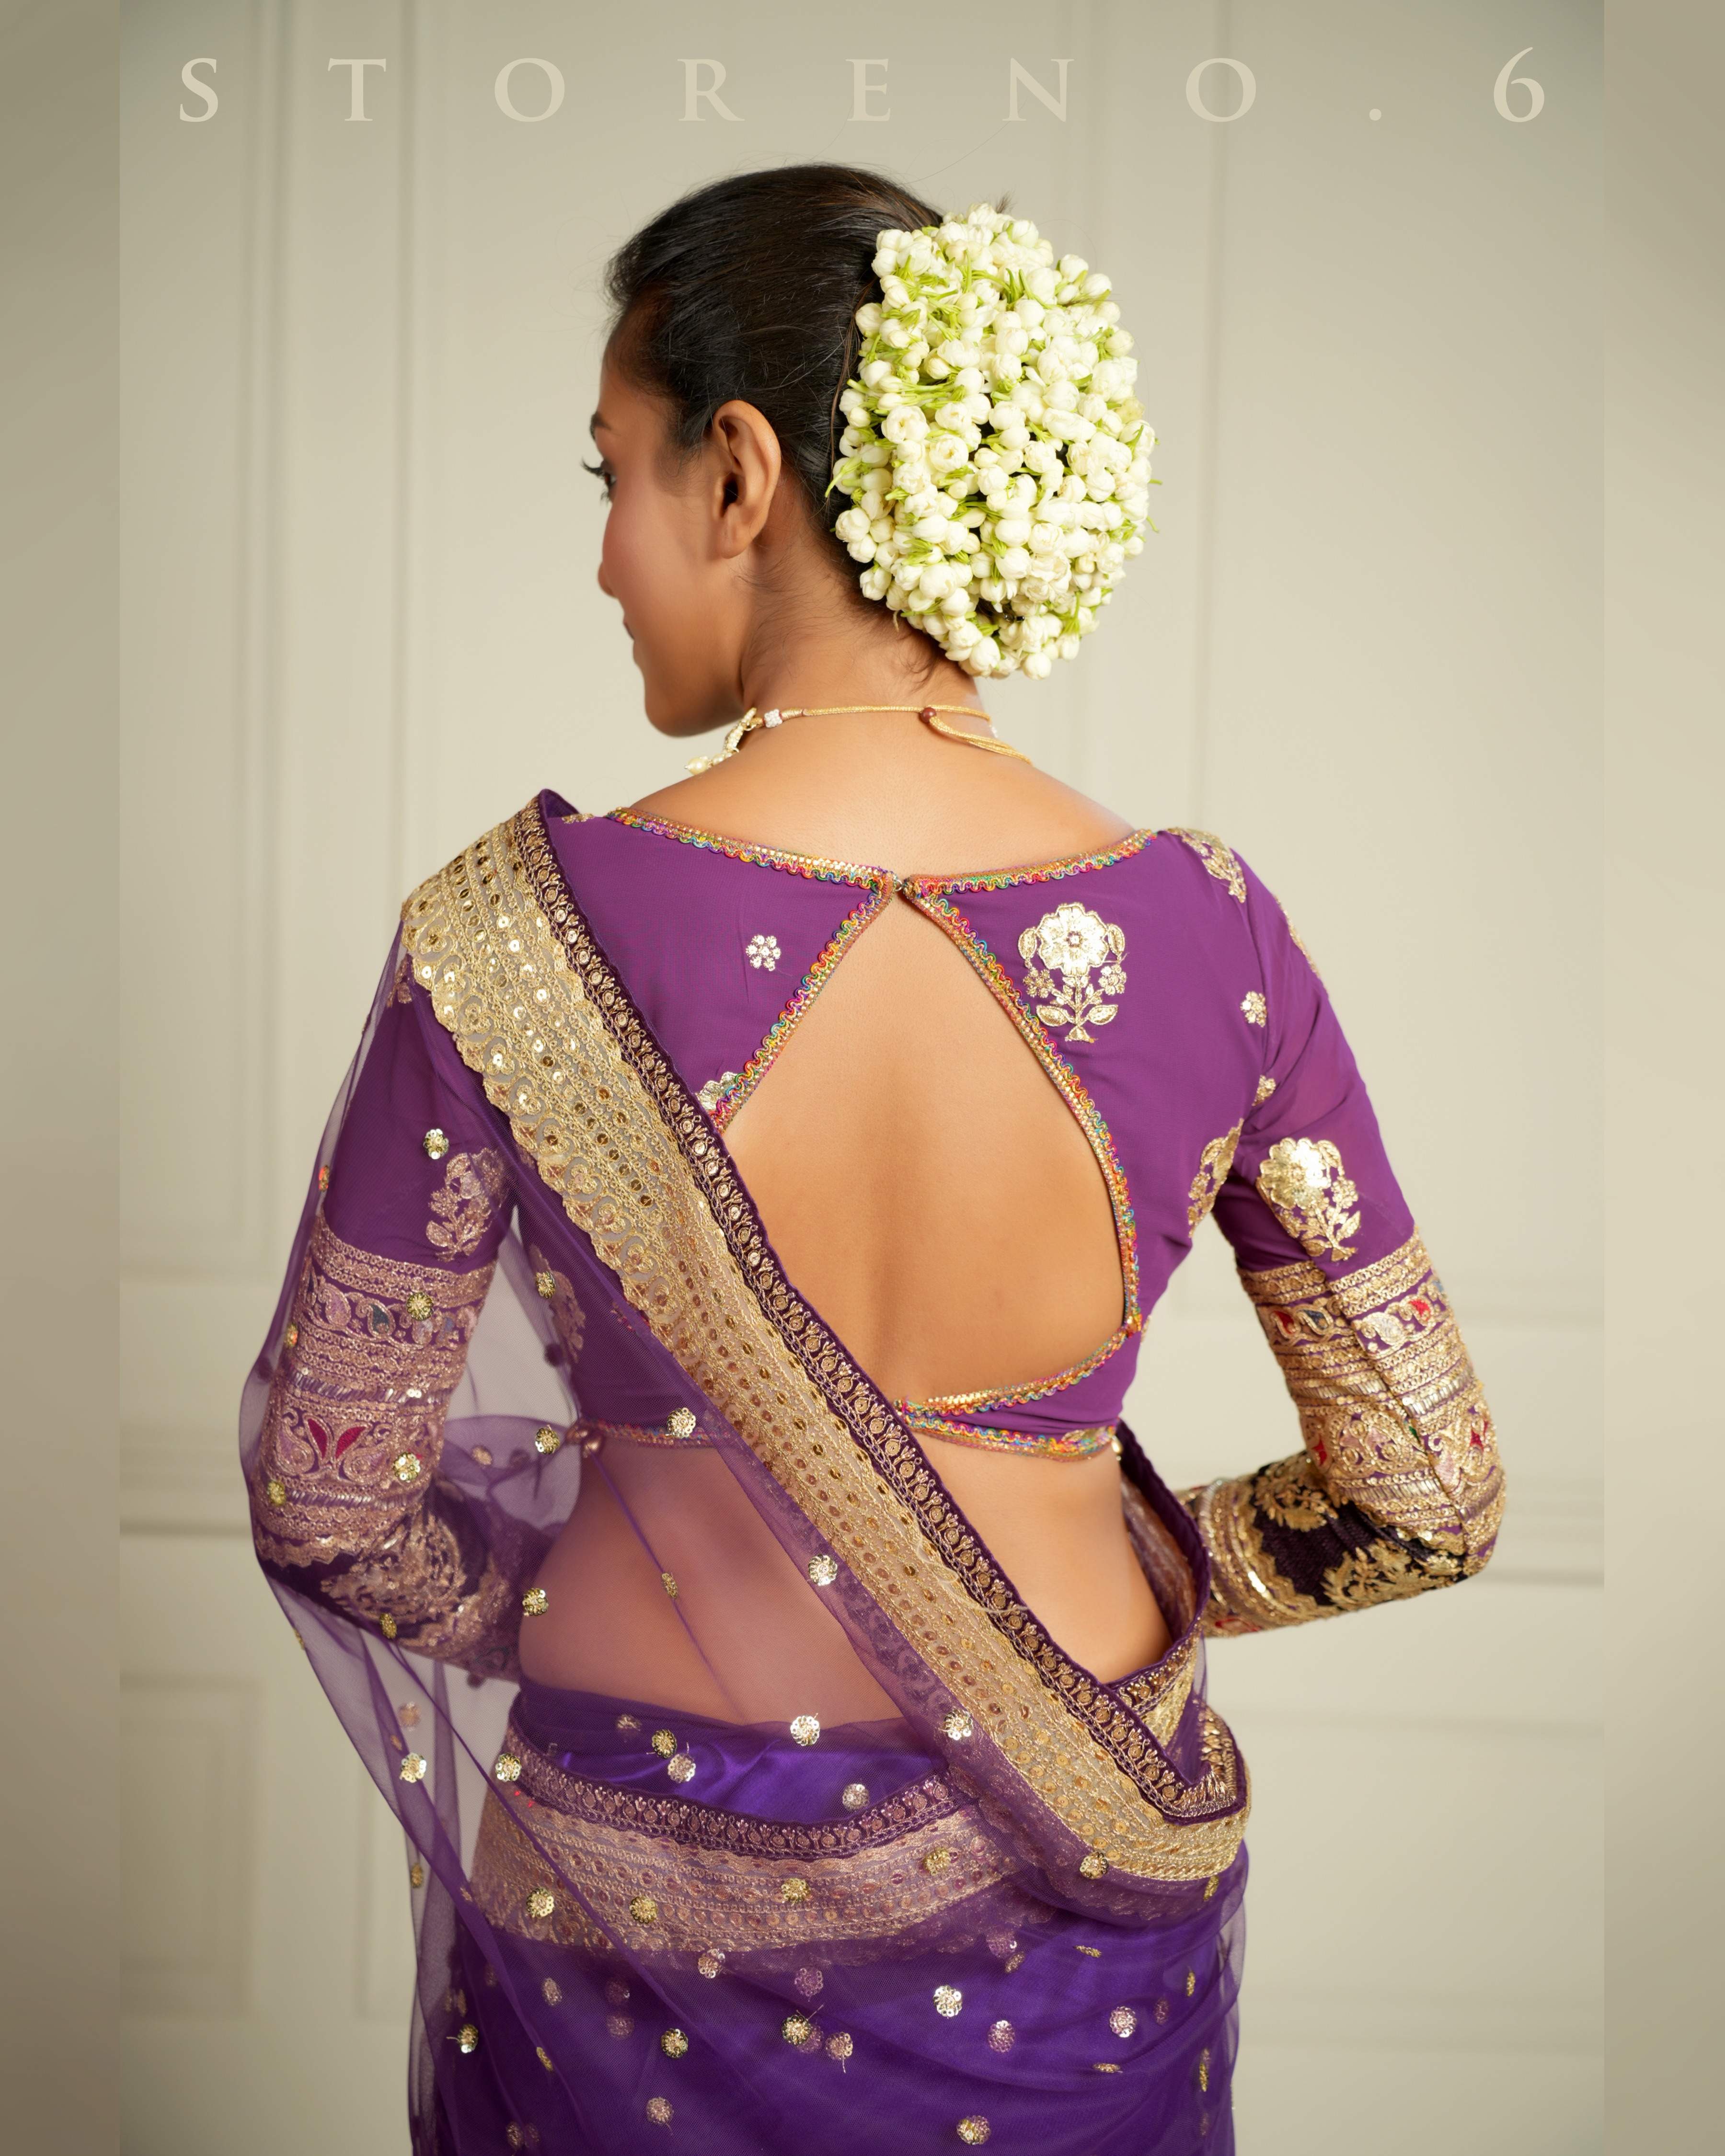 THE QUEEN'S PASSION PLUM SAREE WITH ORNATE ORCHID BLOUSE